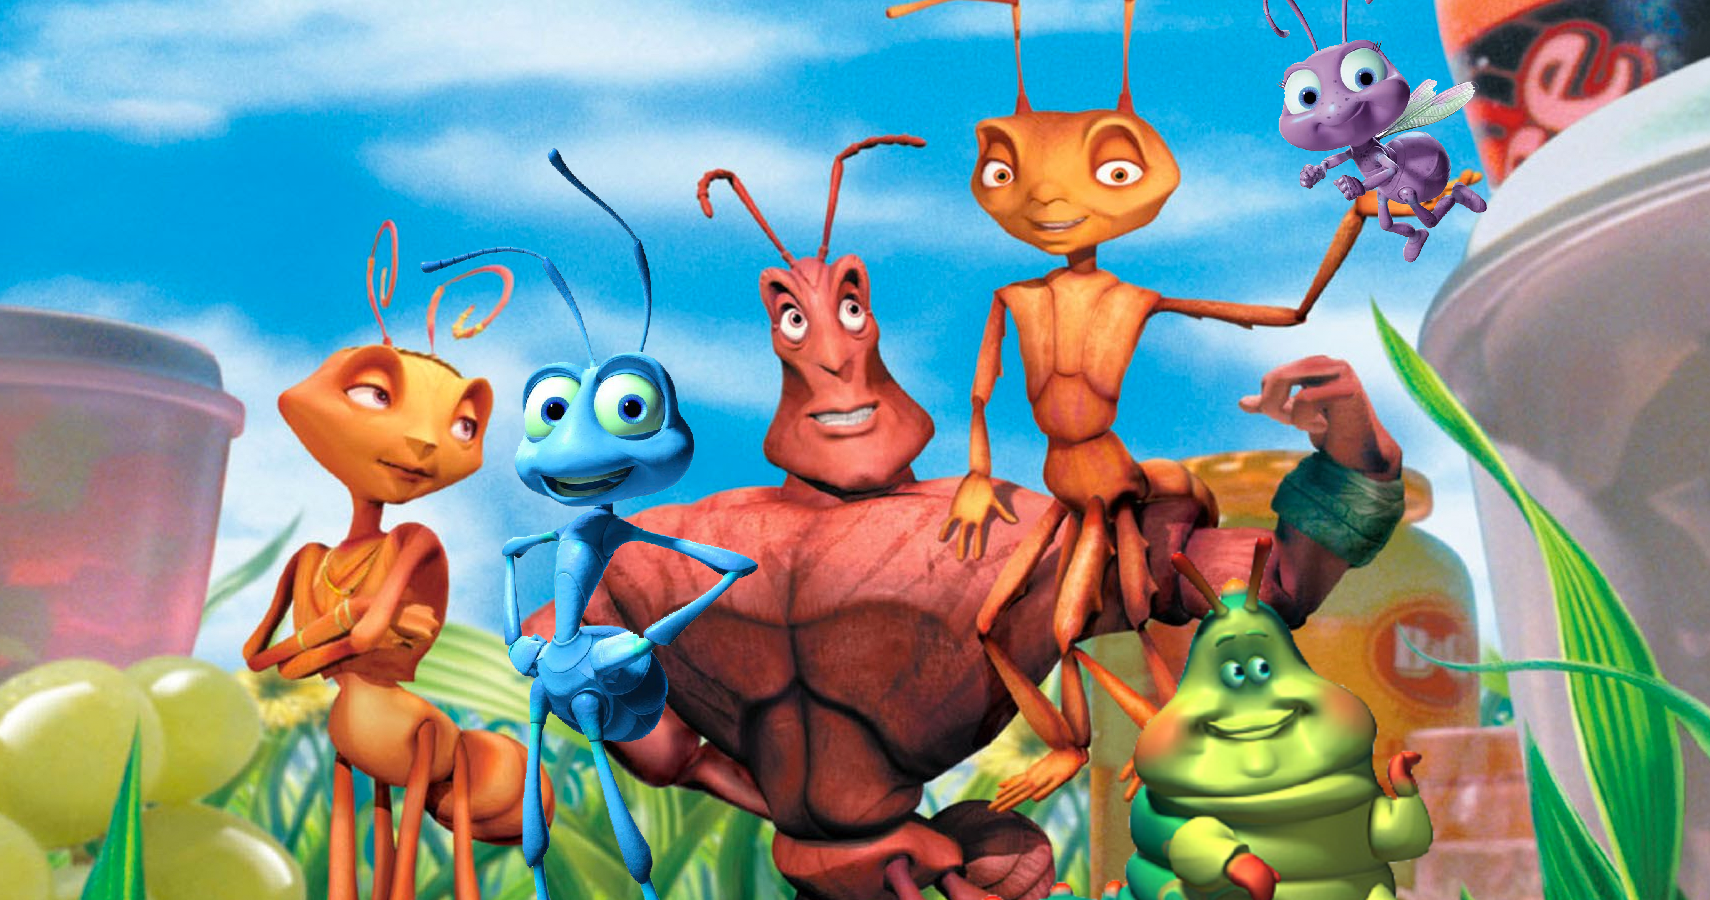 Antz Vs A Bugs Life 5 Reasons Antz Is King 5 Reasons A Bugs Life Takes The Crown